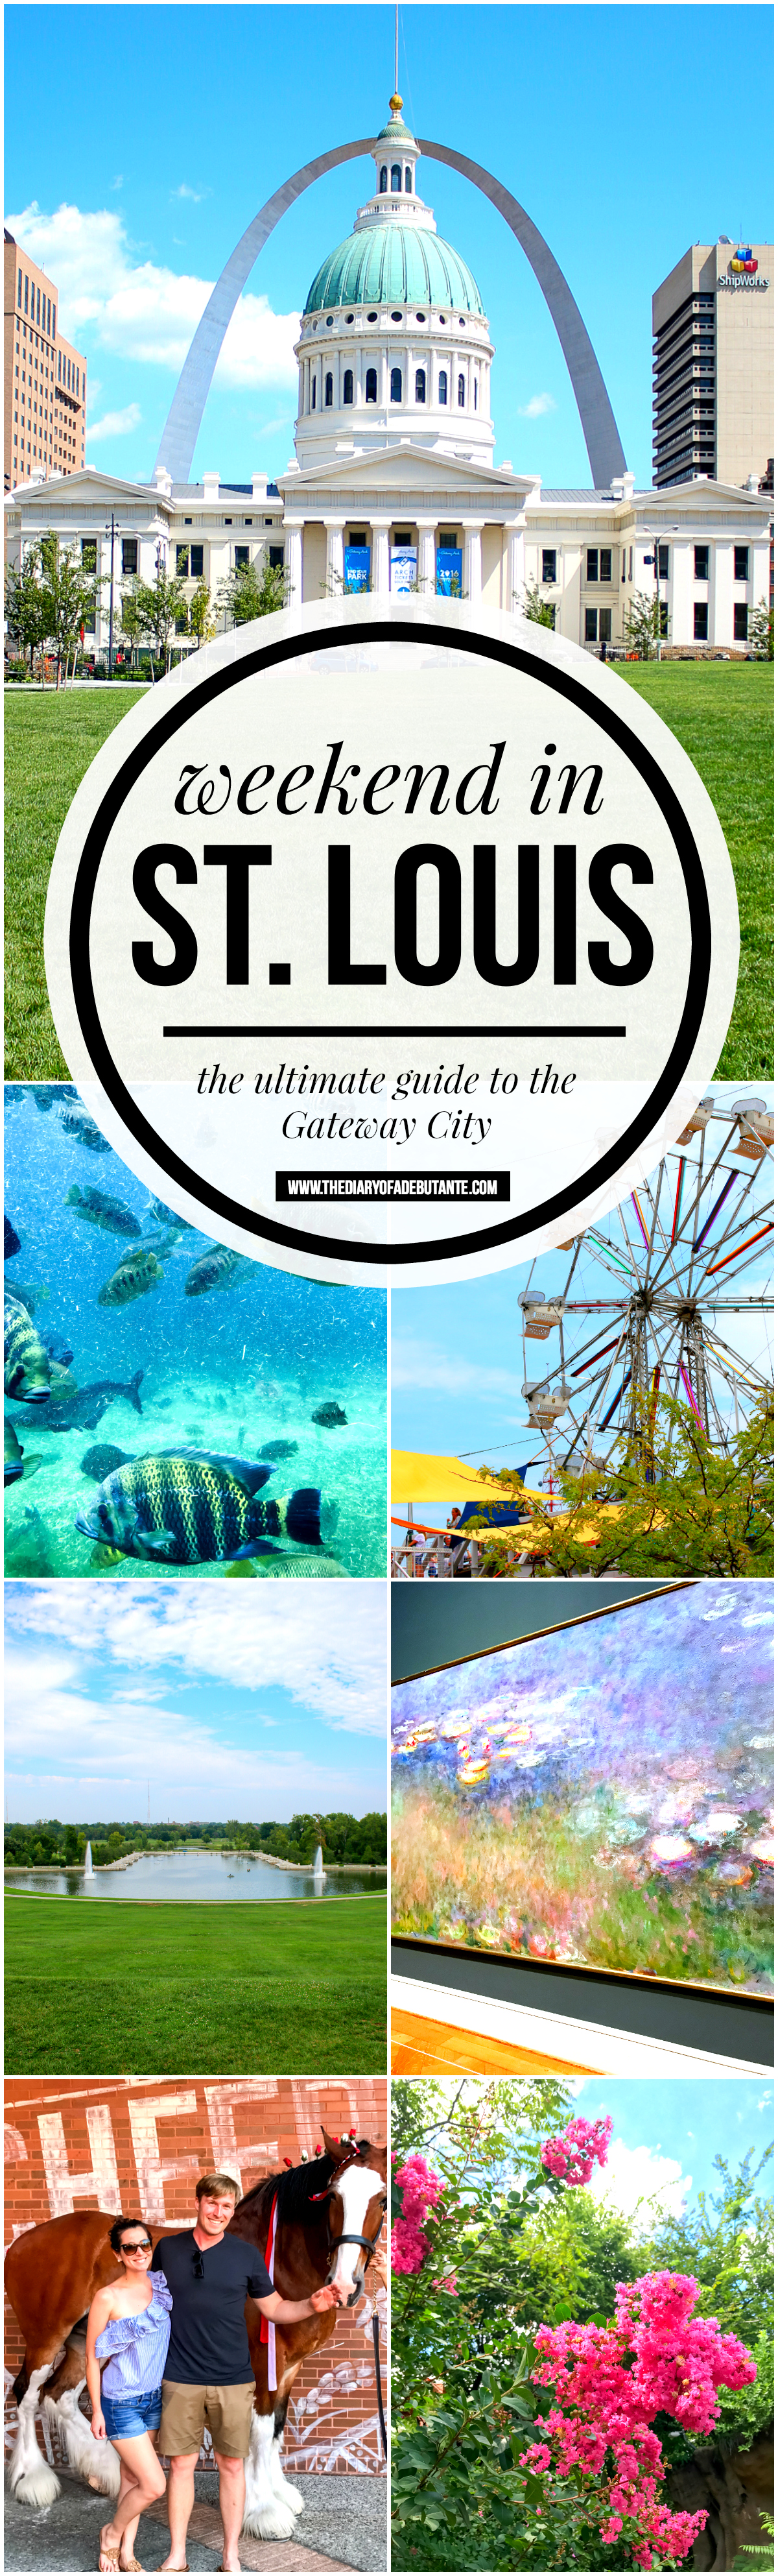 Looking for fun things to do in St. Louis? This Gateway City weekend travel guide lists the best things to do (most of which are free), the best place to stay, and the best places to eat in the Gateway to the West!